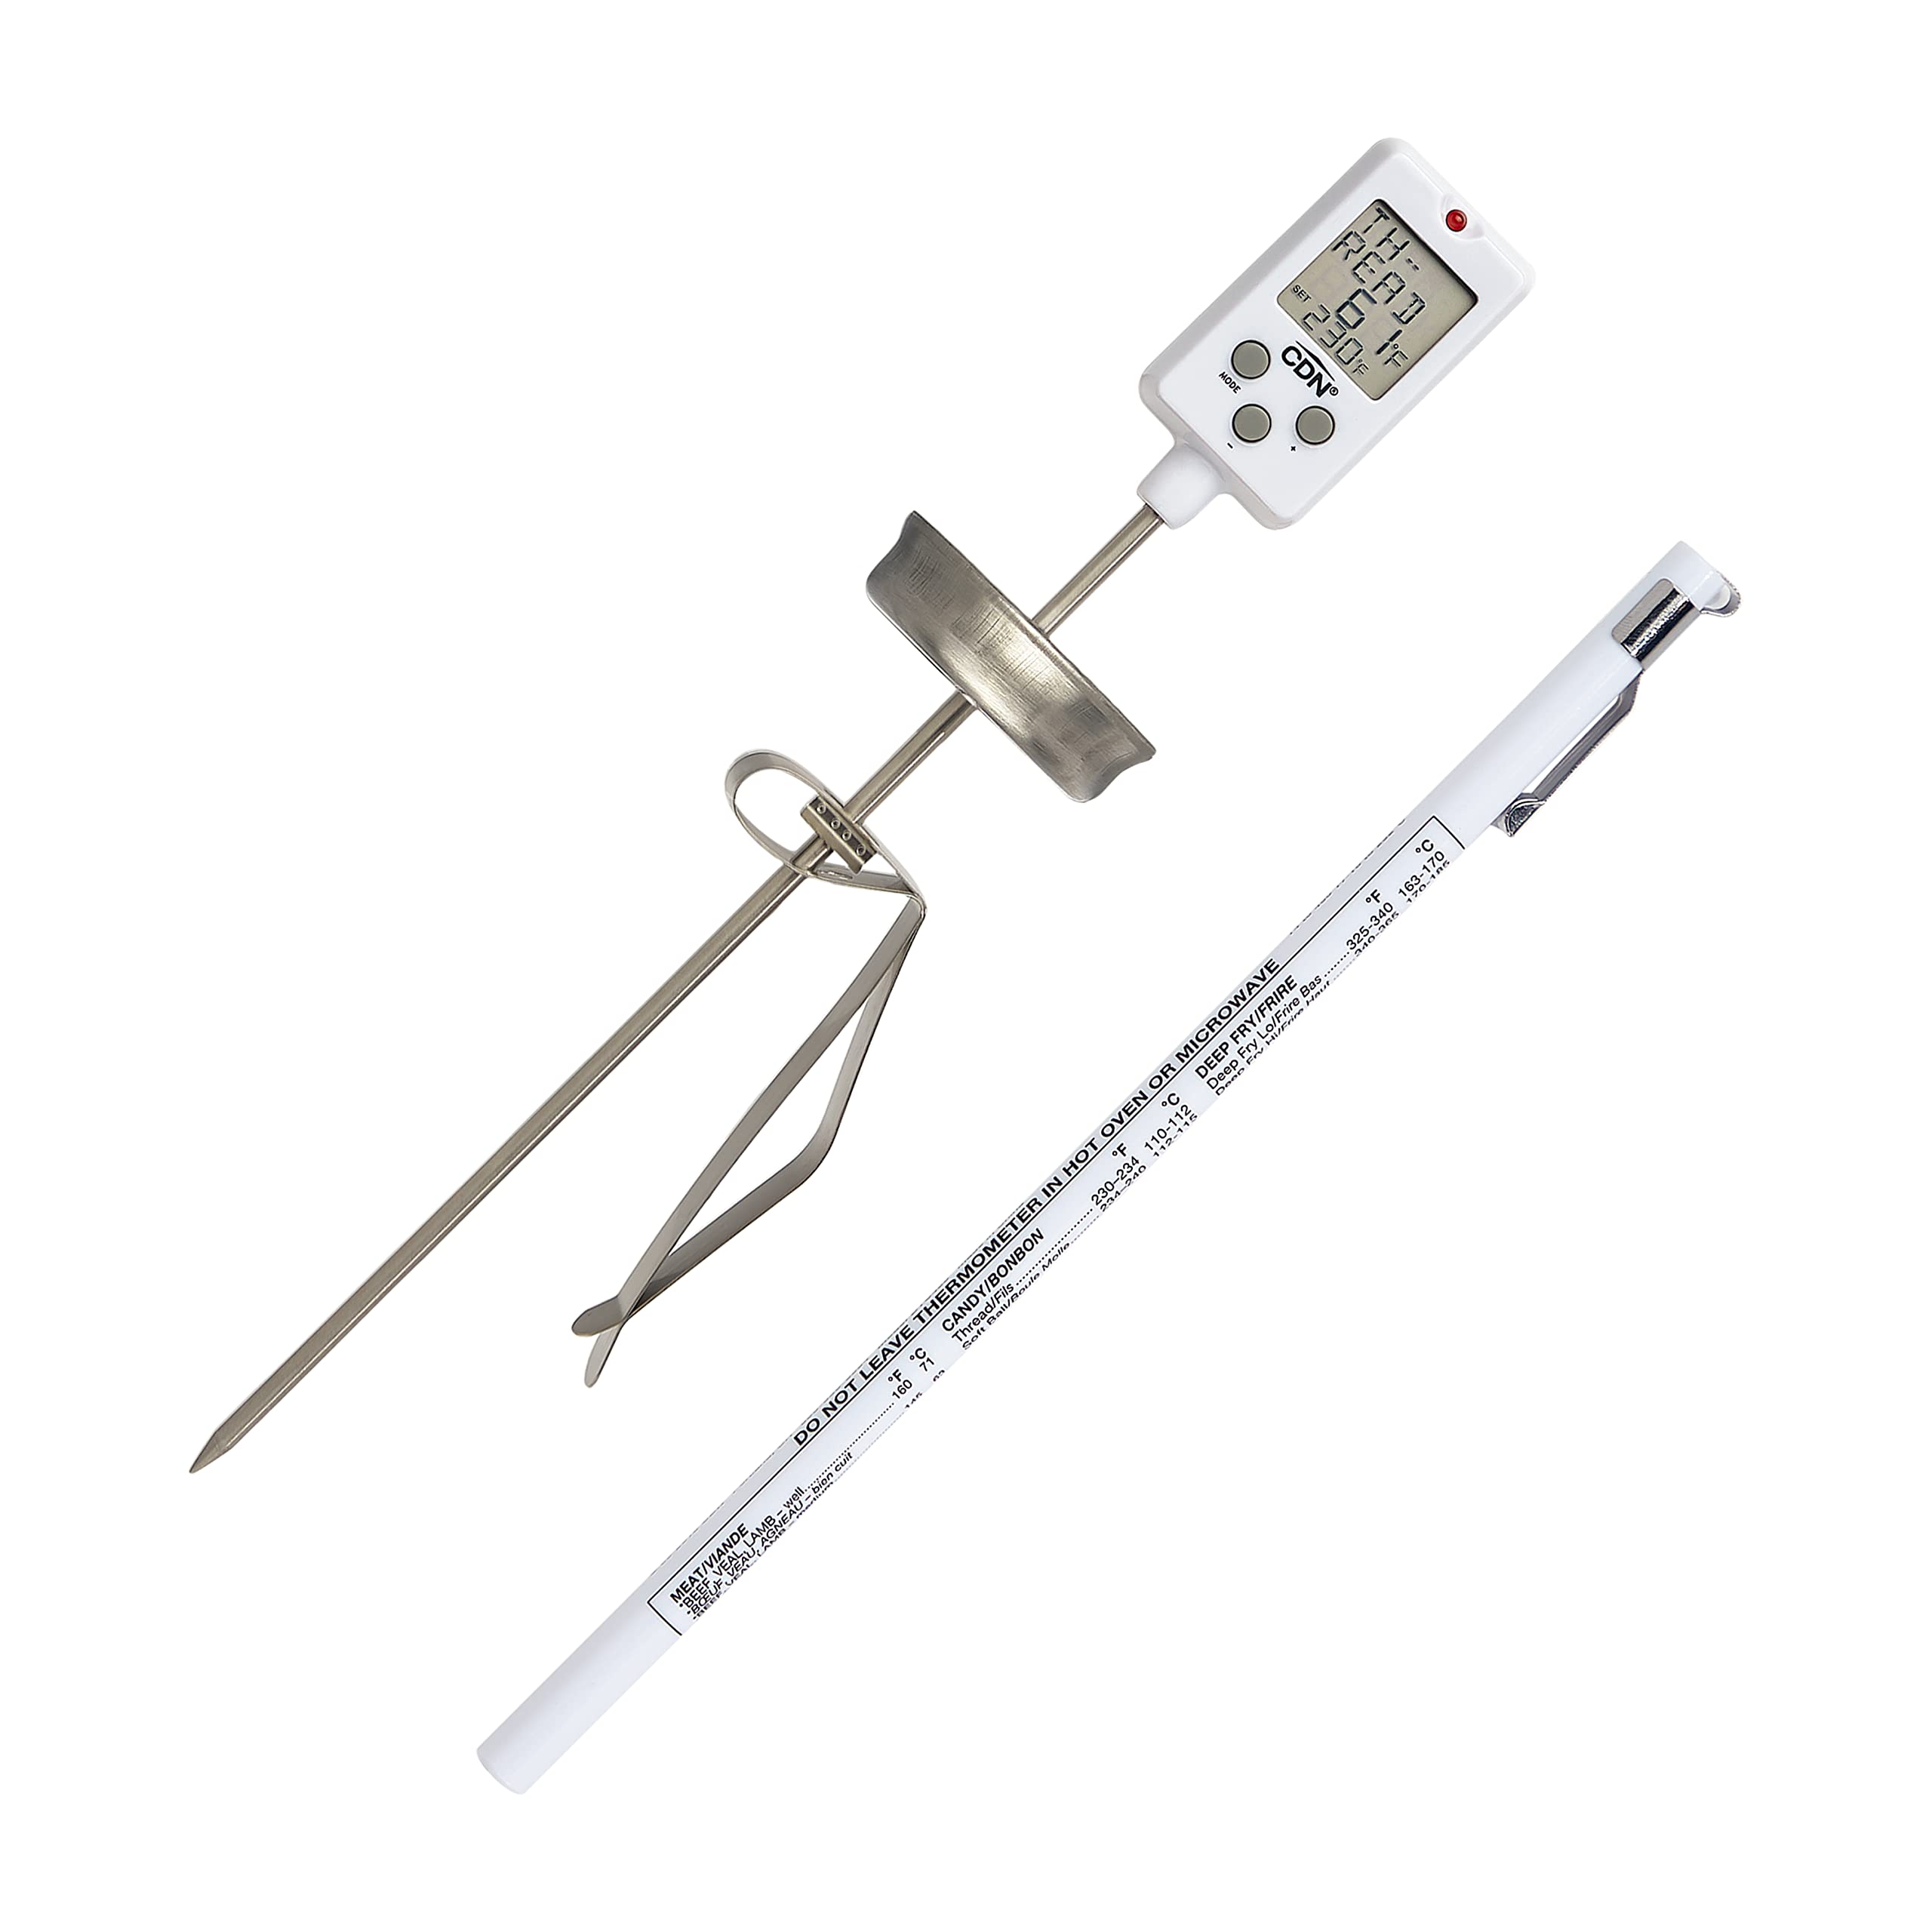 CDN DTC450 Digital Candy/Deep Fry/Pre-Programmed & Programmable Thermometer, White, 10.4